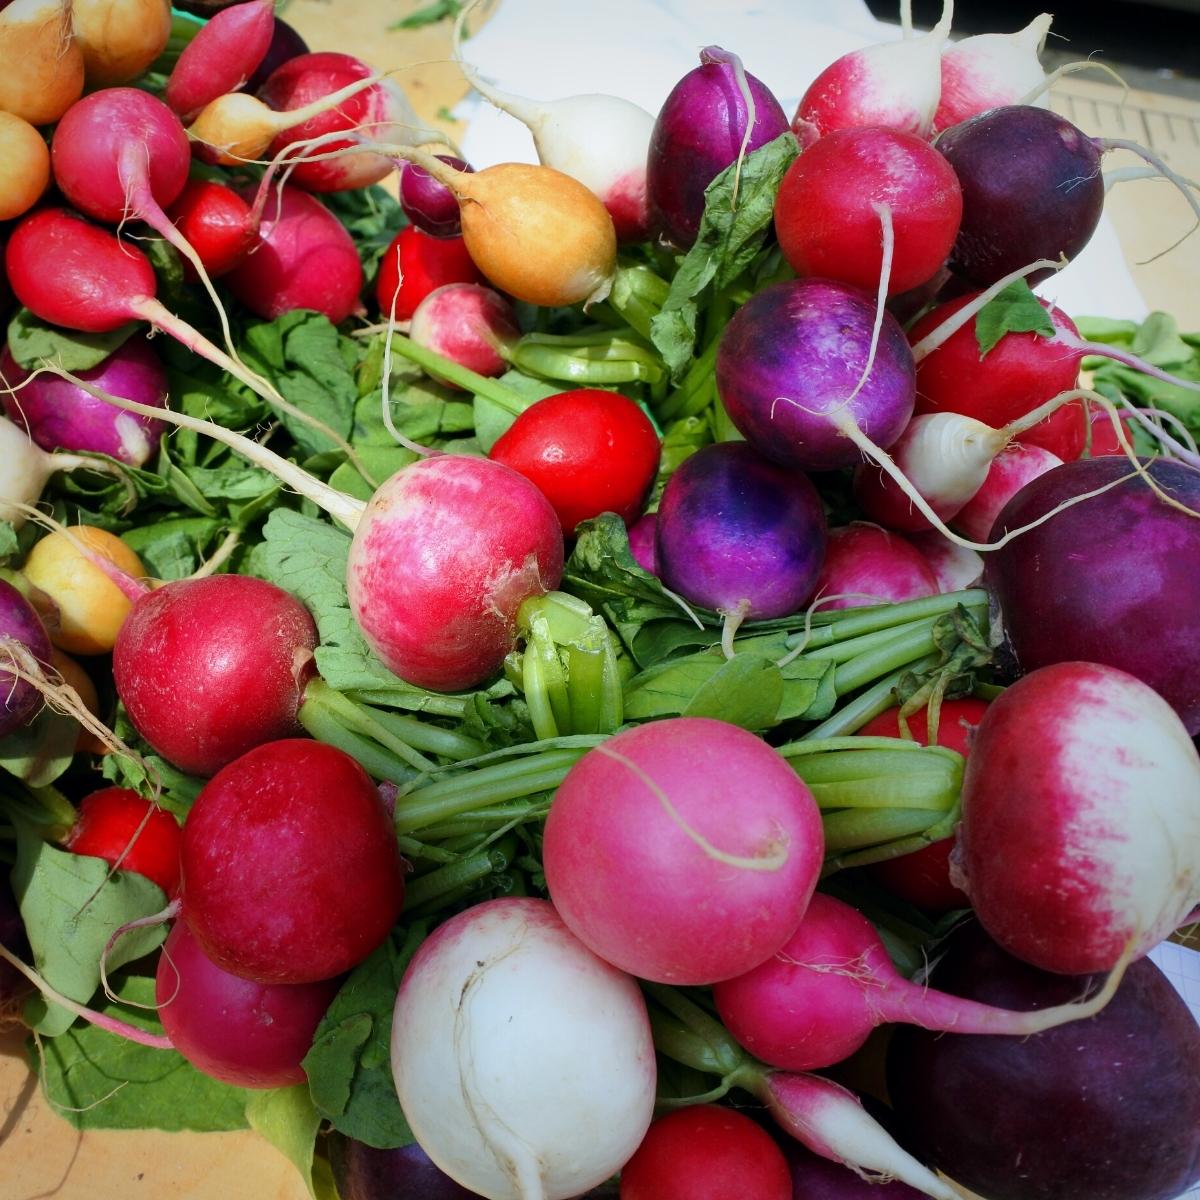 A bundle of fresh radishes and turnips in a rainbow of colors including red, pink, purple, white and yellow with deep green leaves attached.